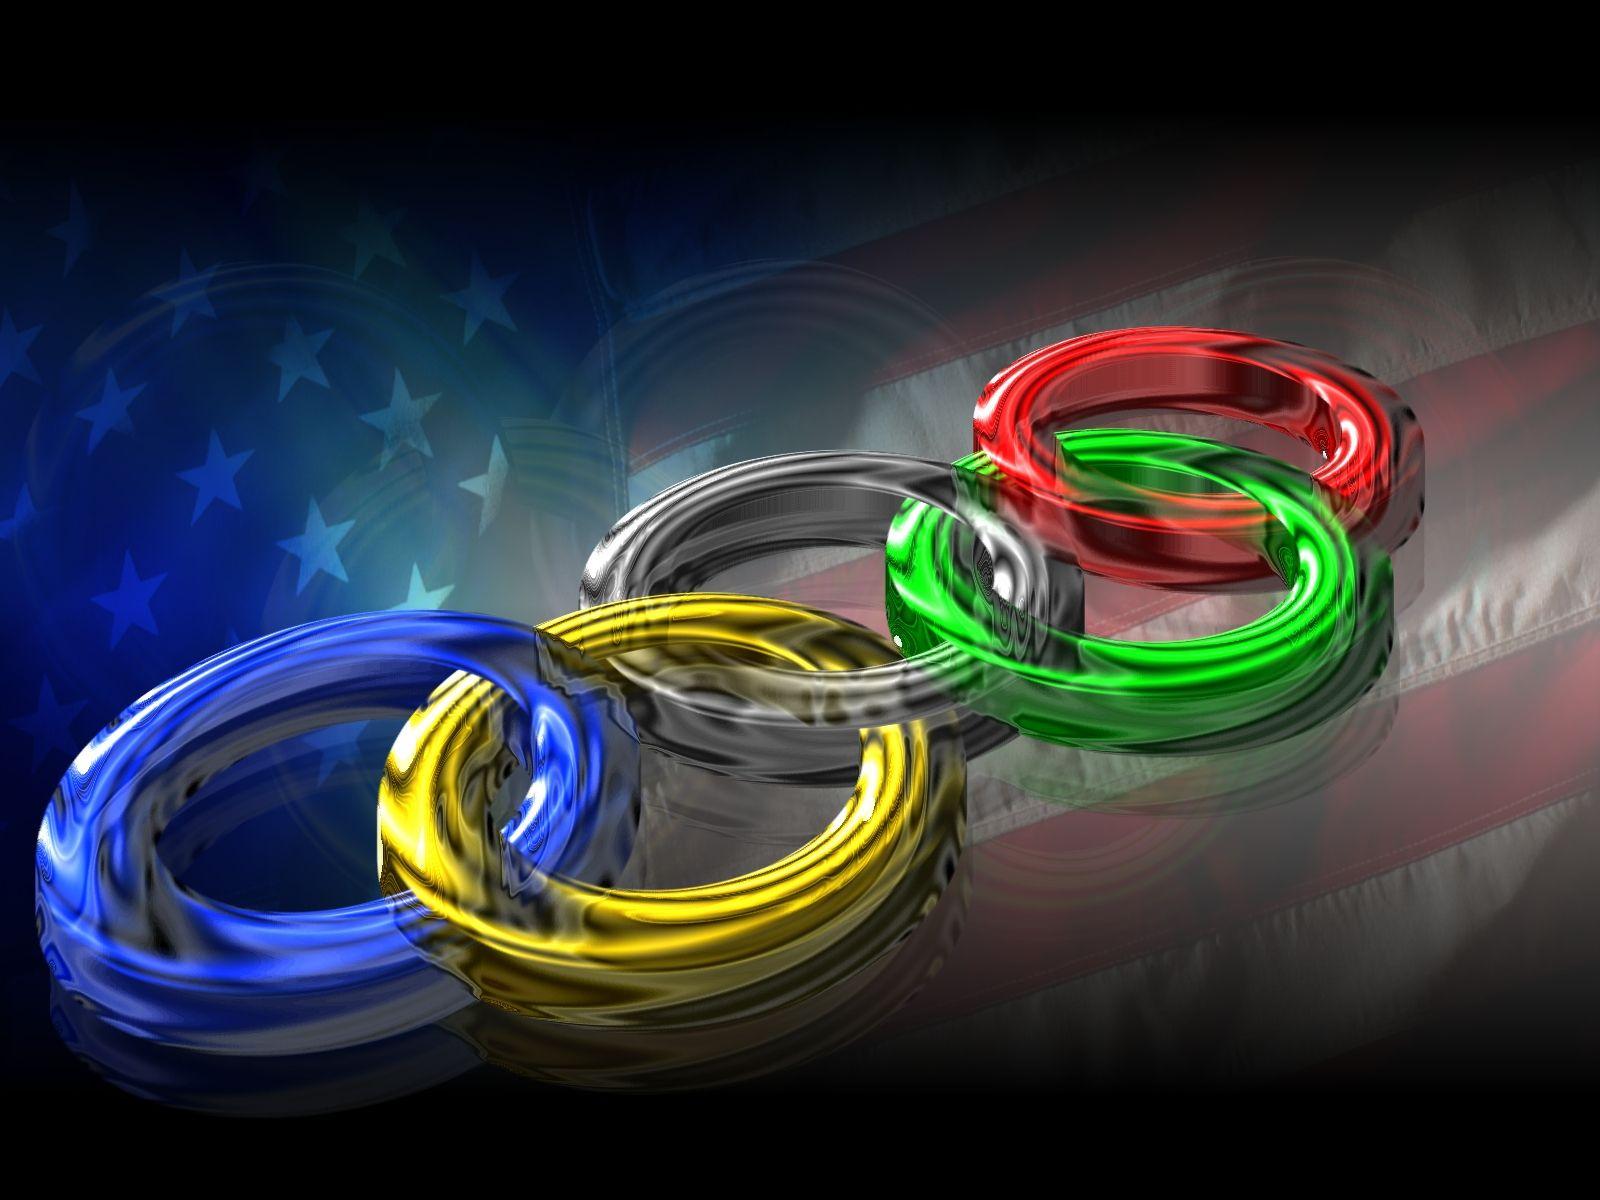 Wacky Olympics. Winter olympic games, Olympic games, Olympic rings